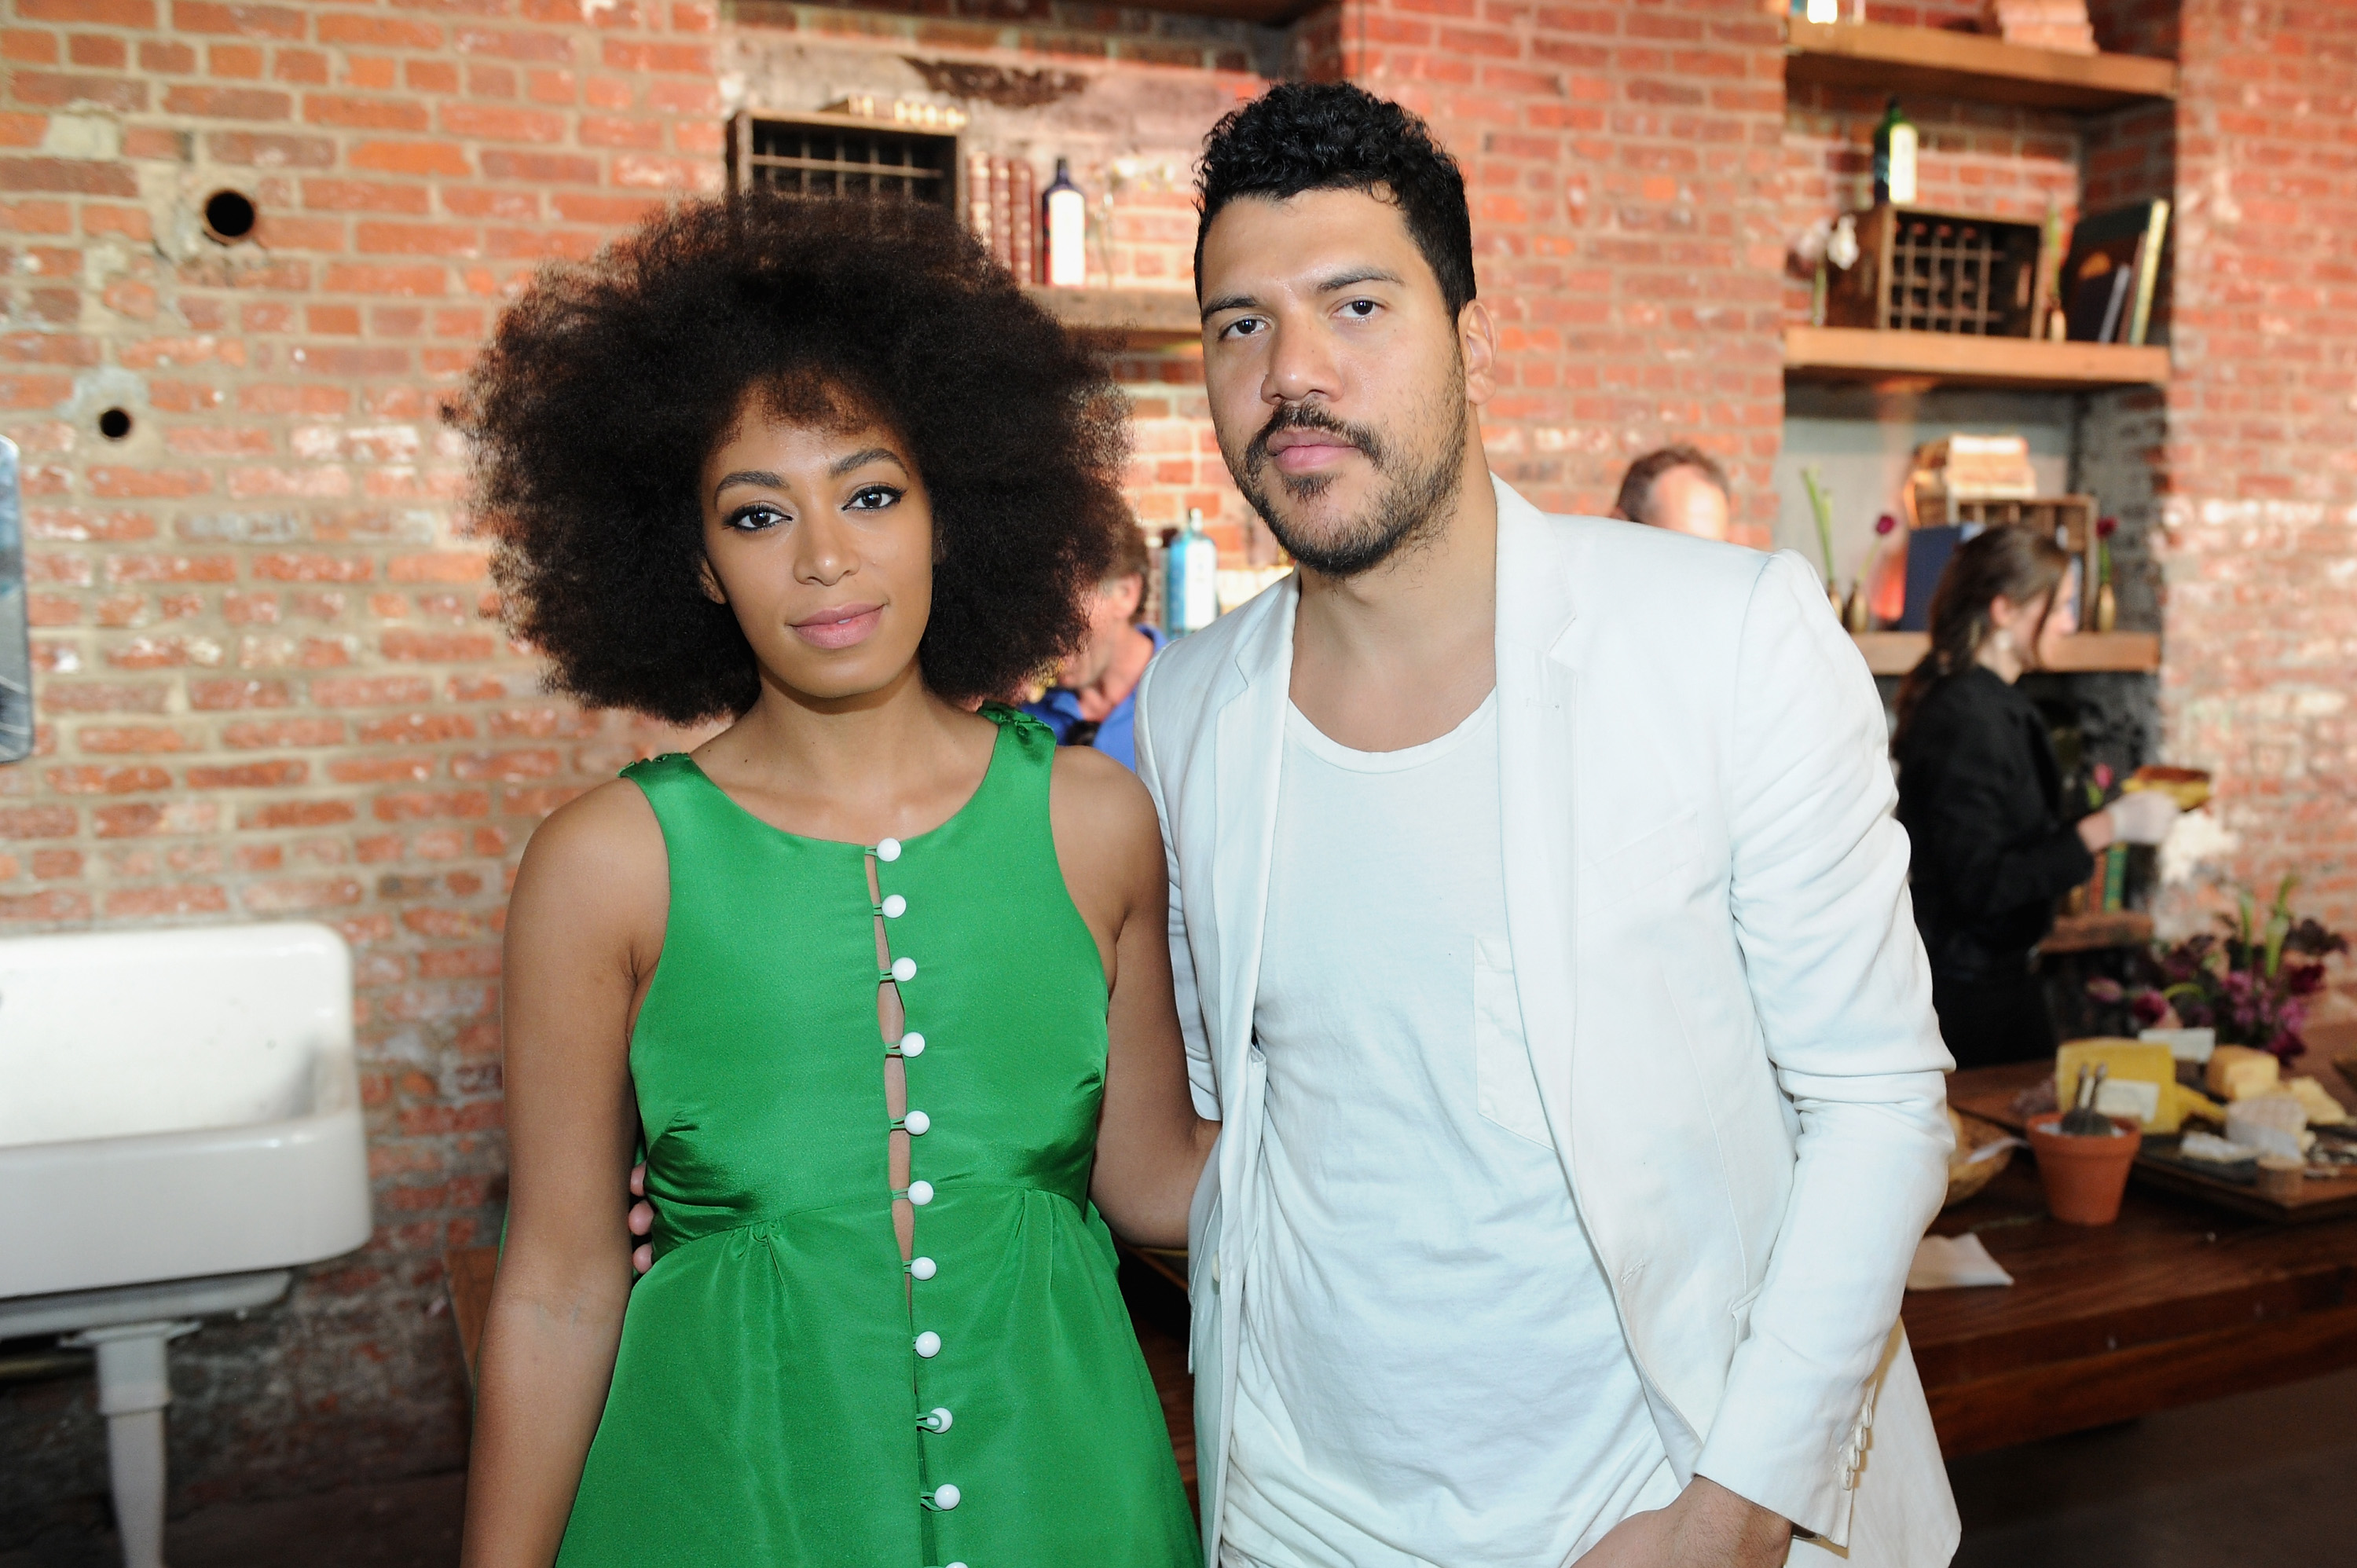 NEW YORK, NY - MAY 03:  Solange Knowles (L) and Benjamin Bronfman attend Pioneer Works 2nd Annual Village Fete presented by BOMBAY SAPPHIRE GIN at Pioneer Works Center for Art + Innovation on May 3, 2015 in New York City.  (Photo by Craig Barritt/Getty Images for BOMBAY SAPPHIRE GIN)